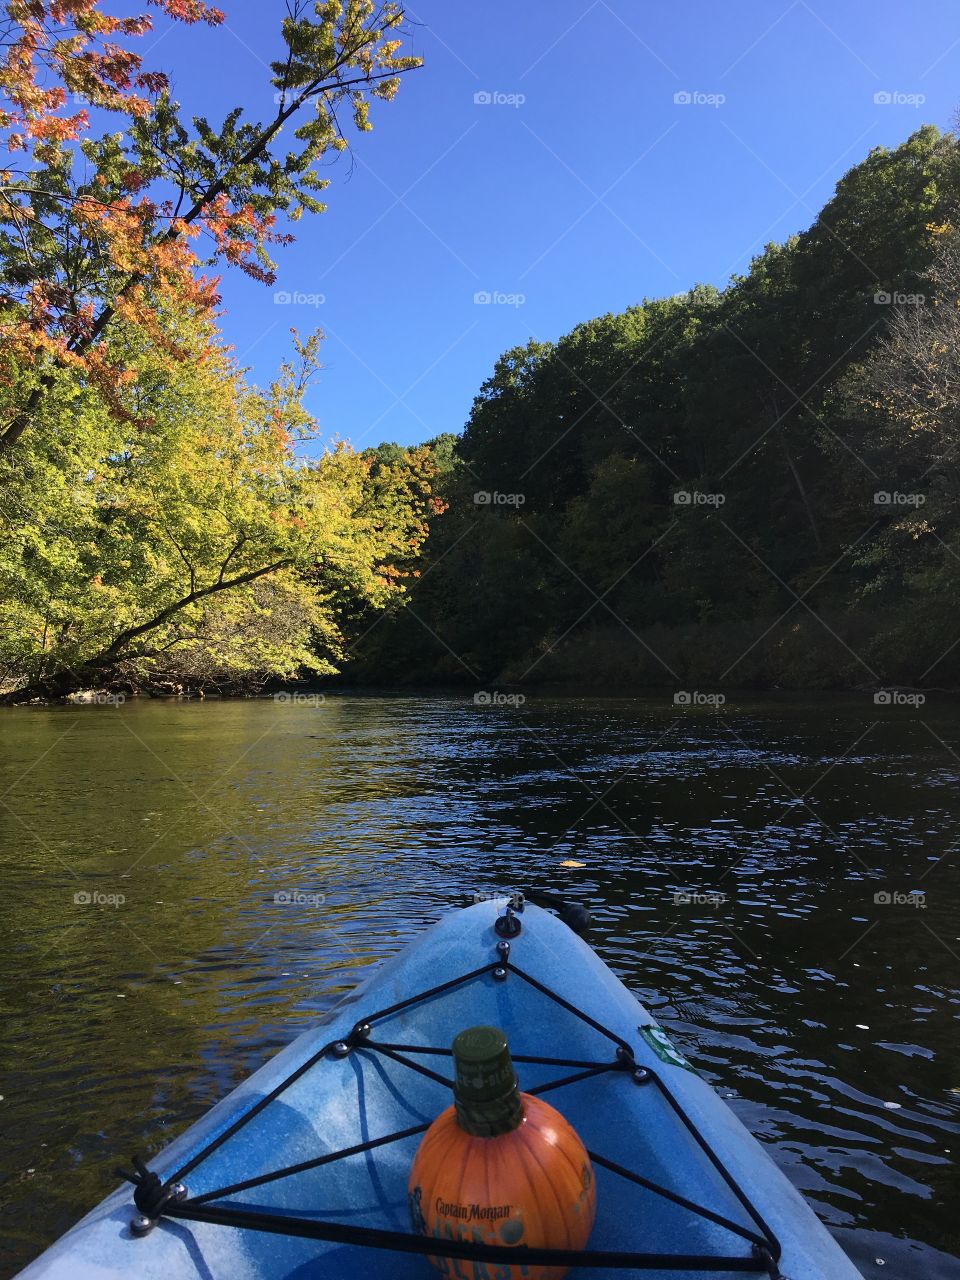 Autumn day on the river! 